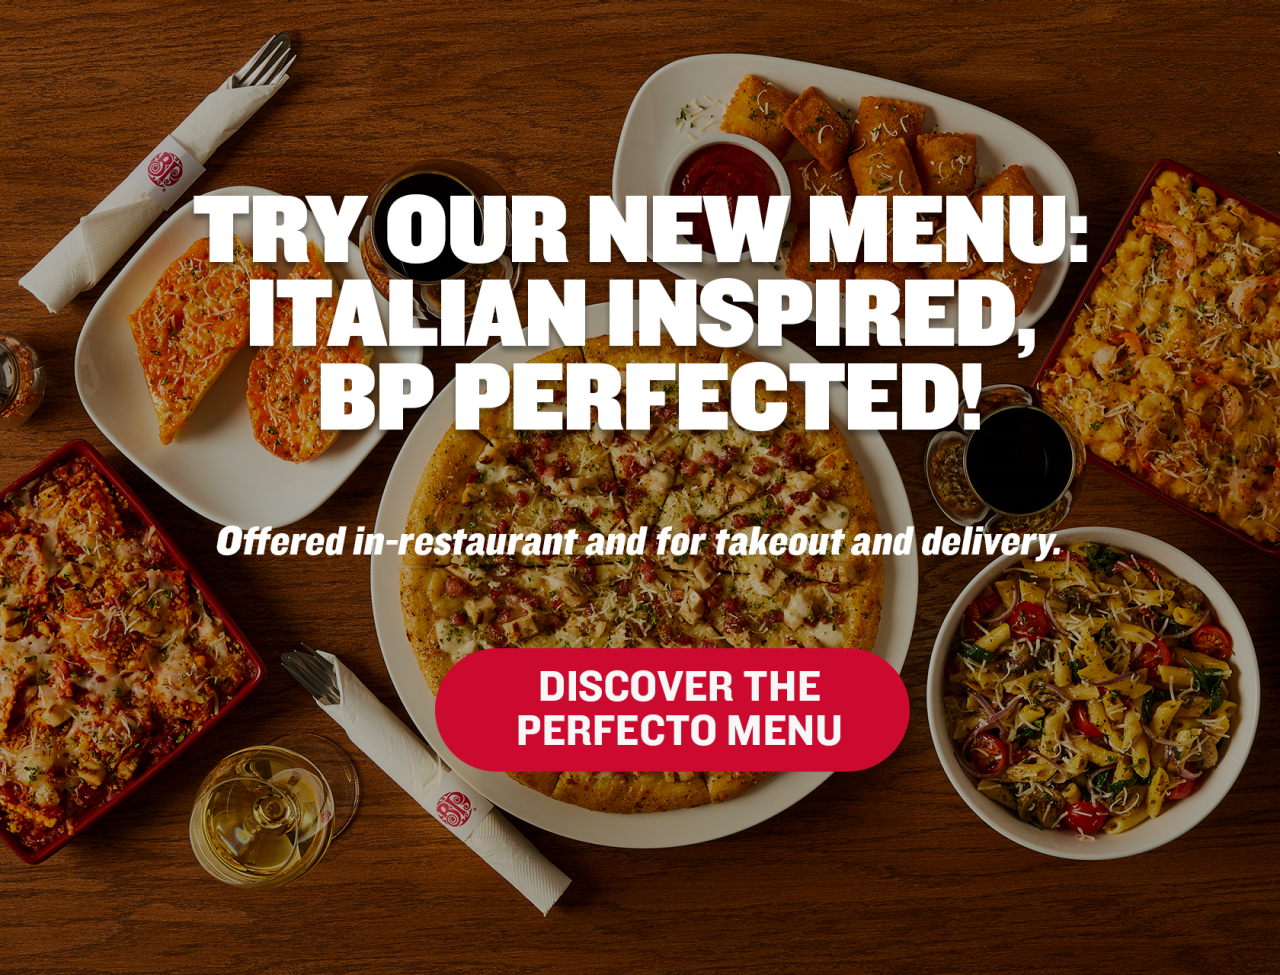 TRY OUR NEW MENU: ITALIAN INSPIRED, BP PERFECTED!